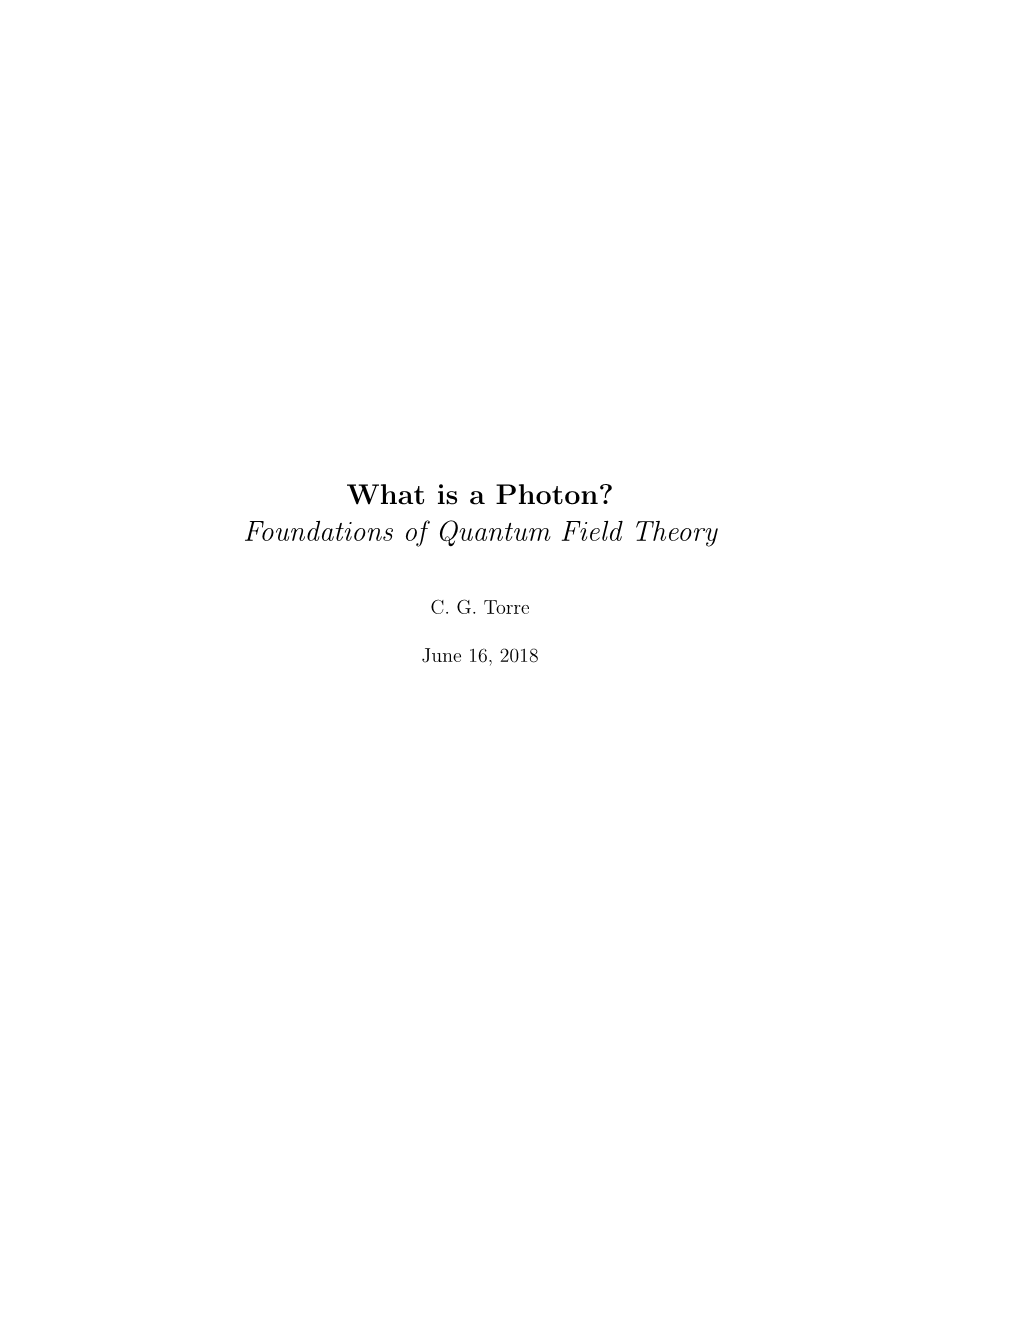 What Is a Photon? Foundations of Quantum Field Theory